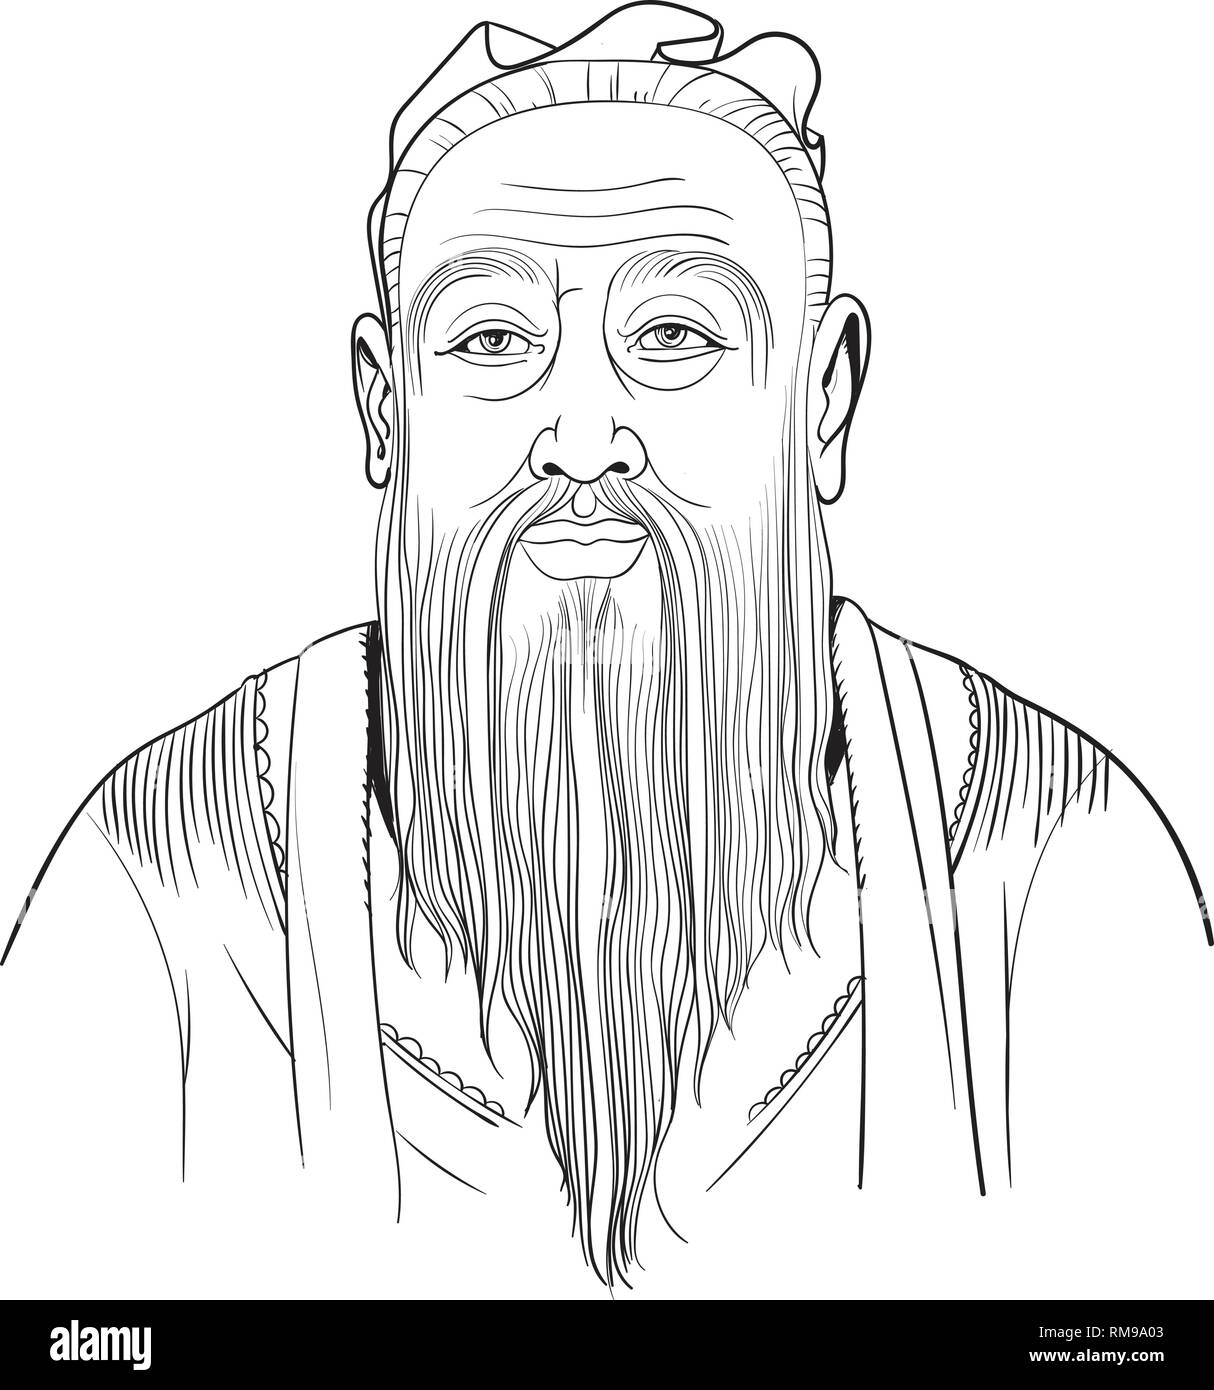 Confucius portrait in line art illustration. He was Chinese philosopher, scholar and teacher of the Spring and Autumn period of Chinese history. Stock Vector